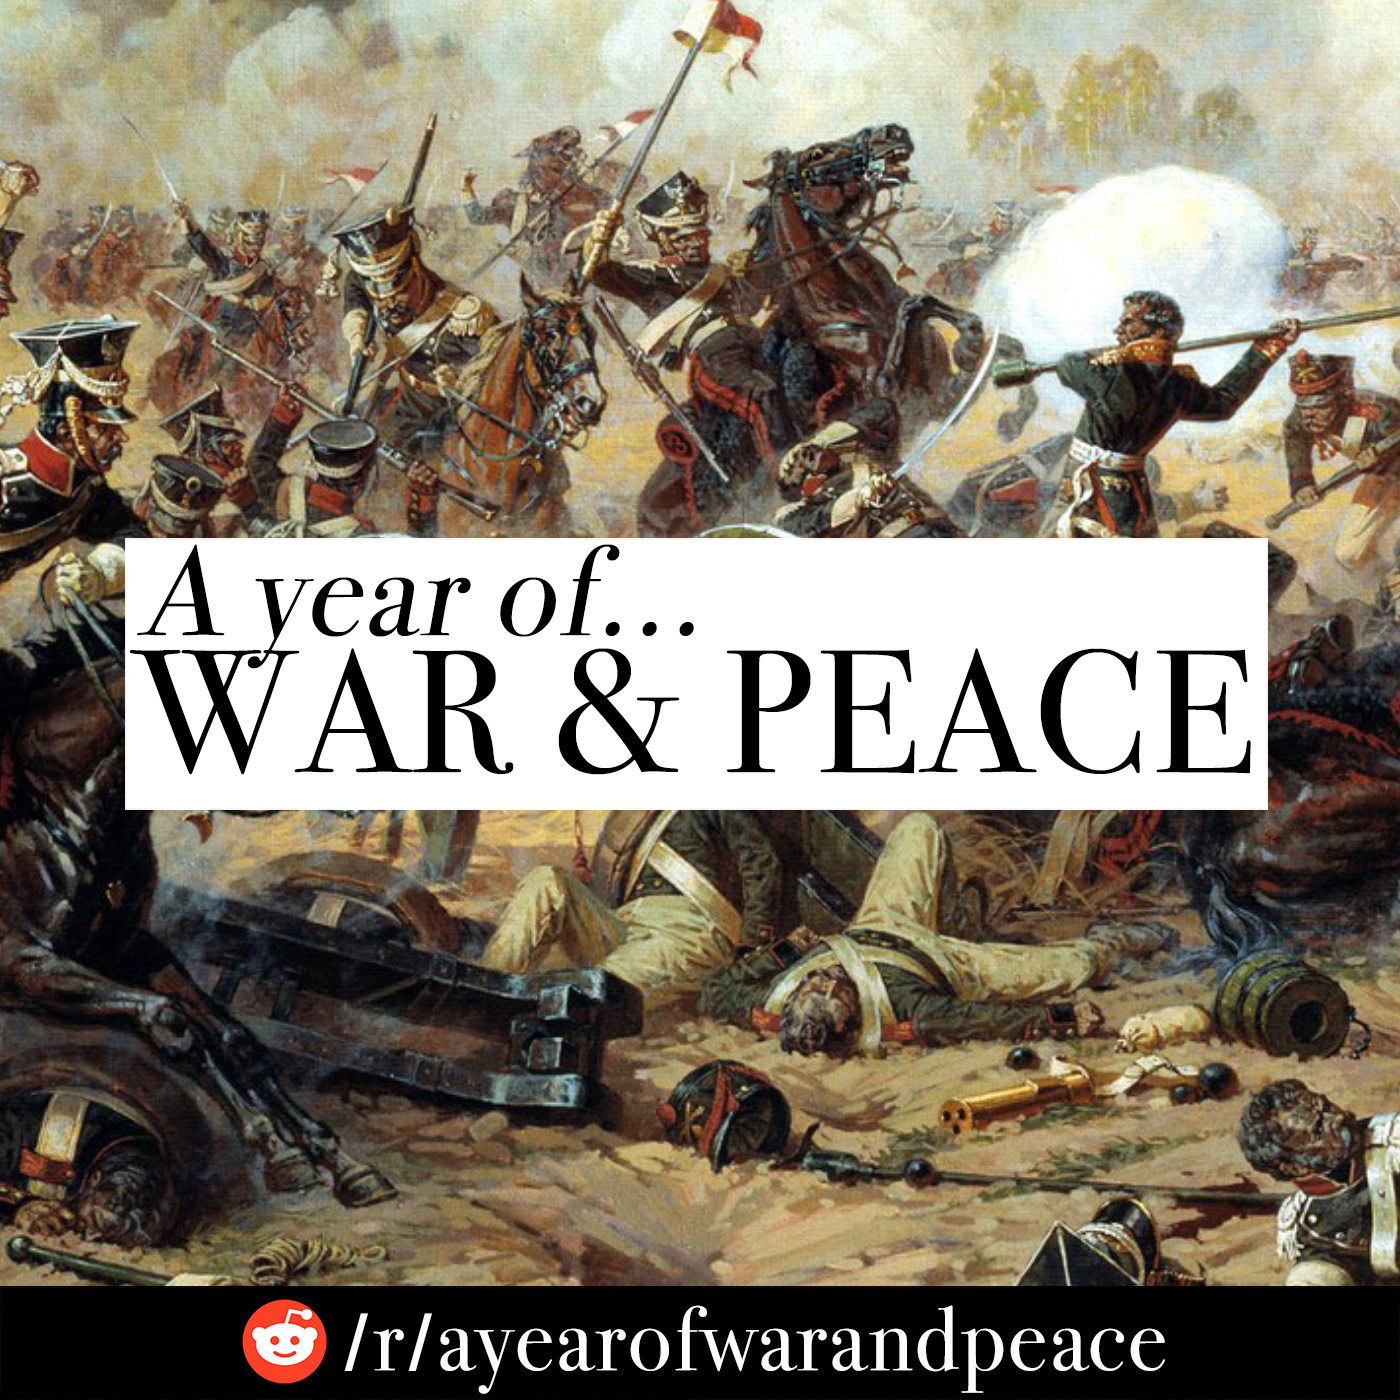 290 - Book 13, Chapter 11. War & Peace Audiobook and Discussion